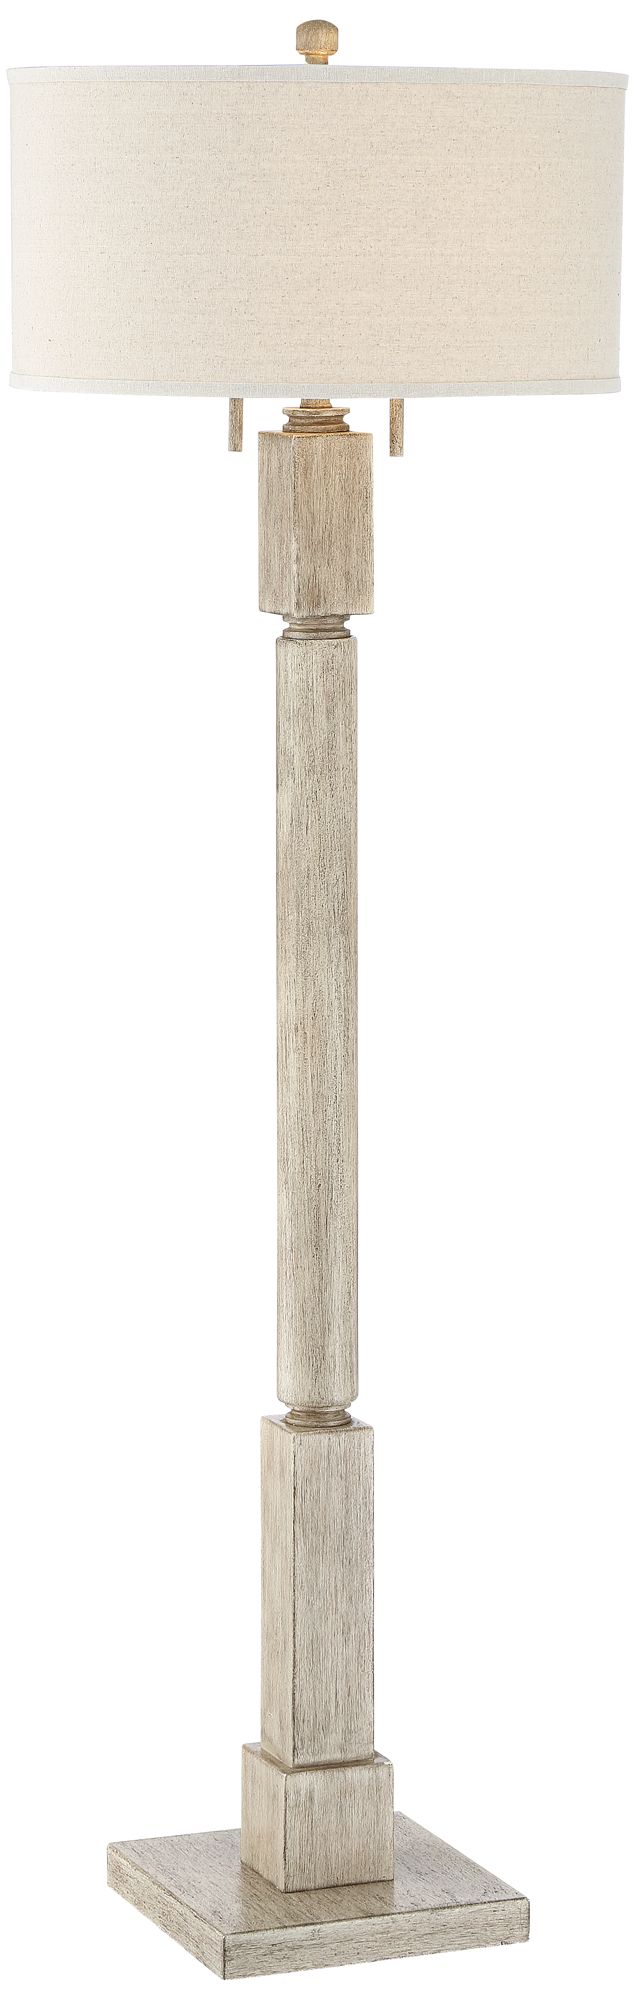 Barnes and Ivy Baluster Country Cottage Floor Lamp 63 1/2" Tall Pickled Wood Oatmeal Linen Drum Shade for Living Room Reading Bedroom Office House - image 2 of 10